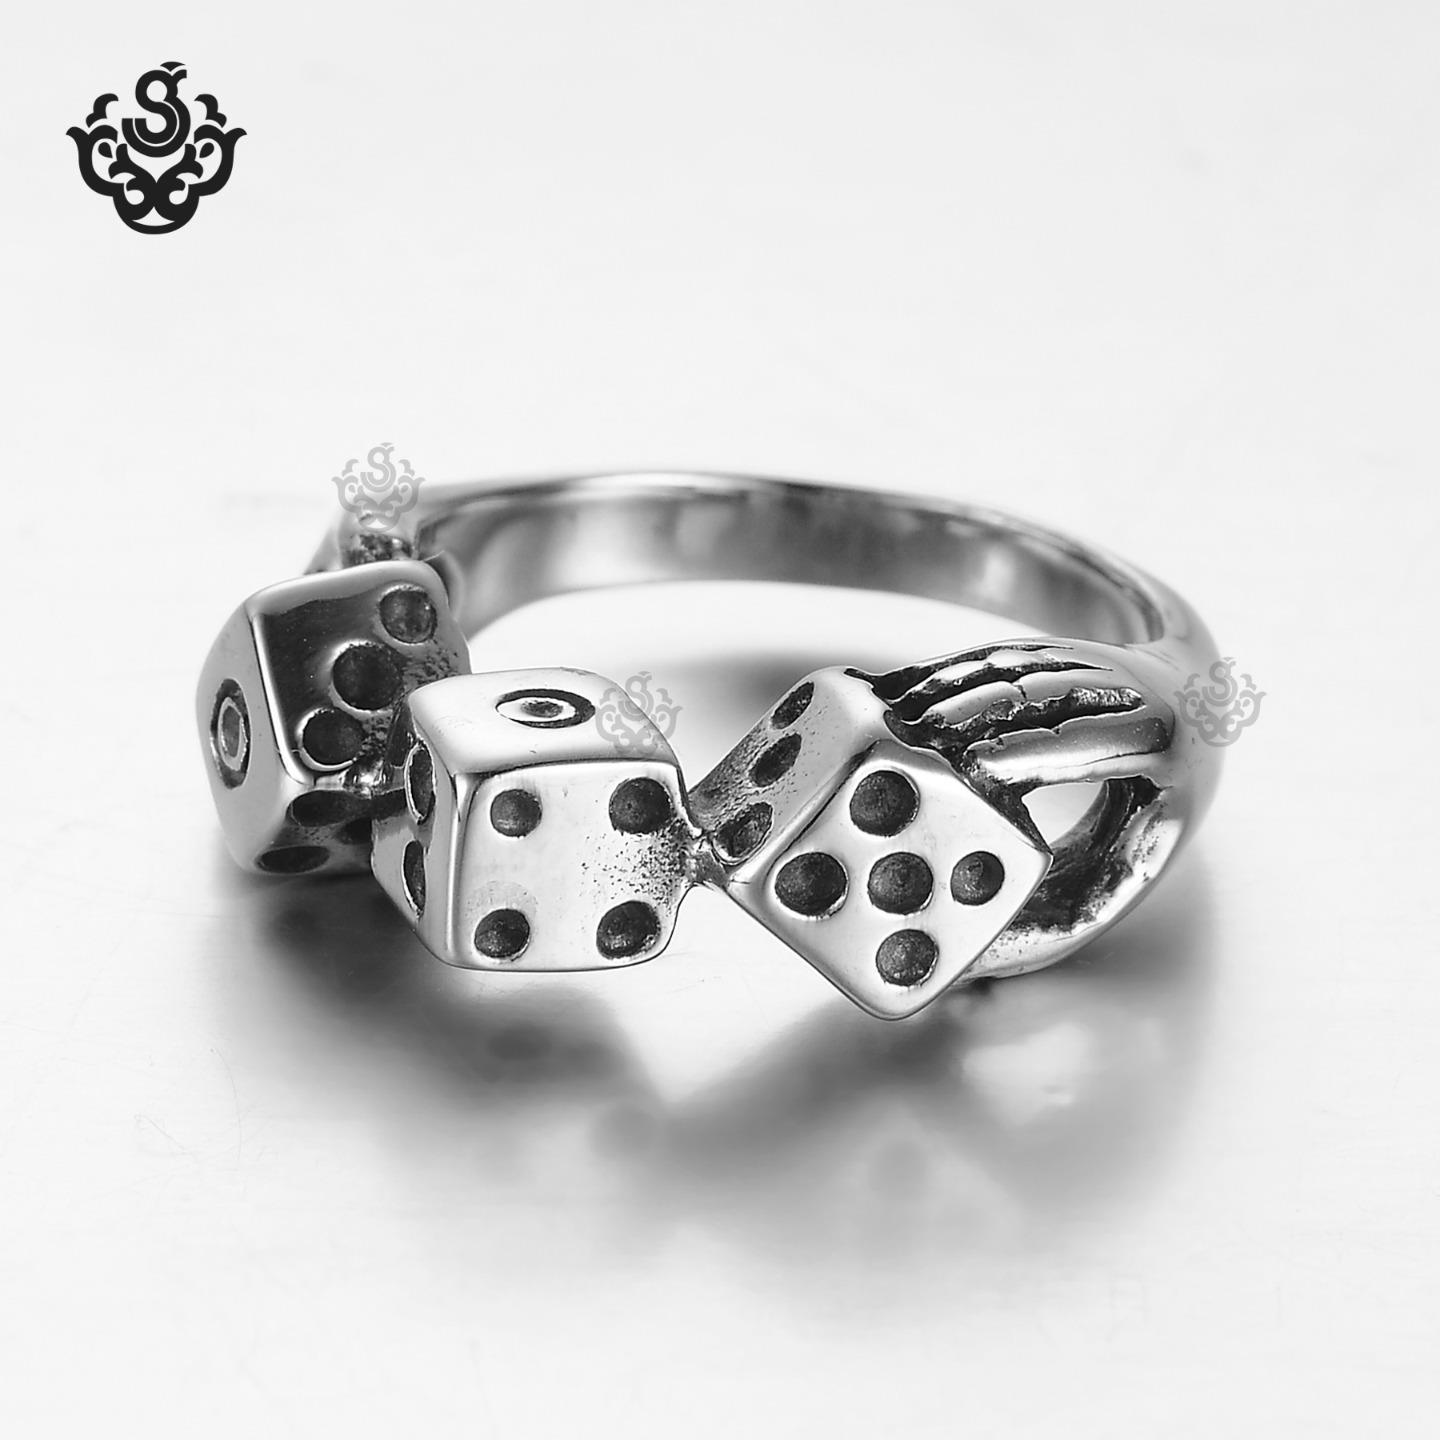 Silver ring stainless steel lucky dice soft gothic